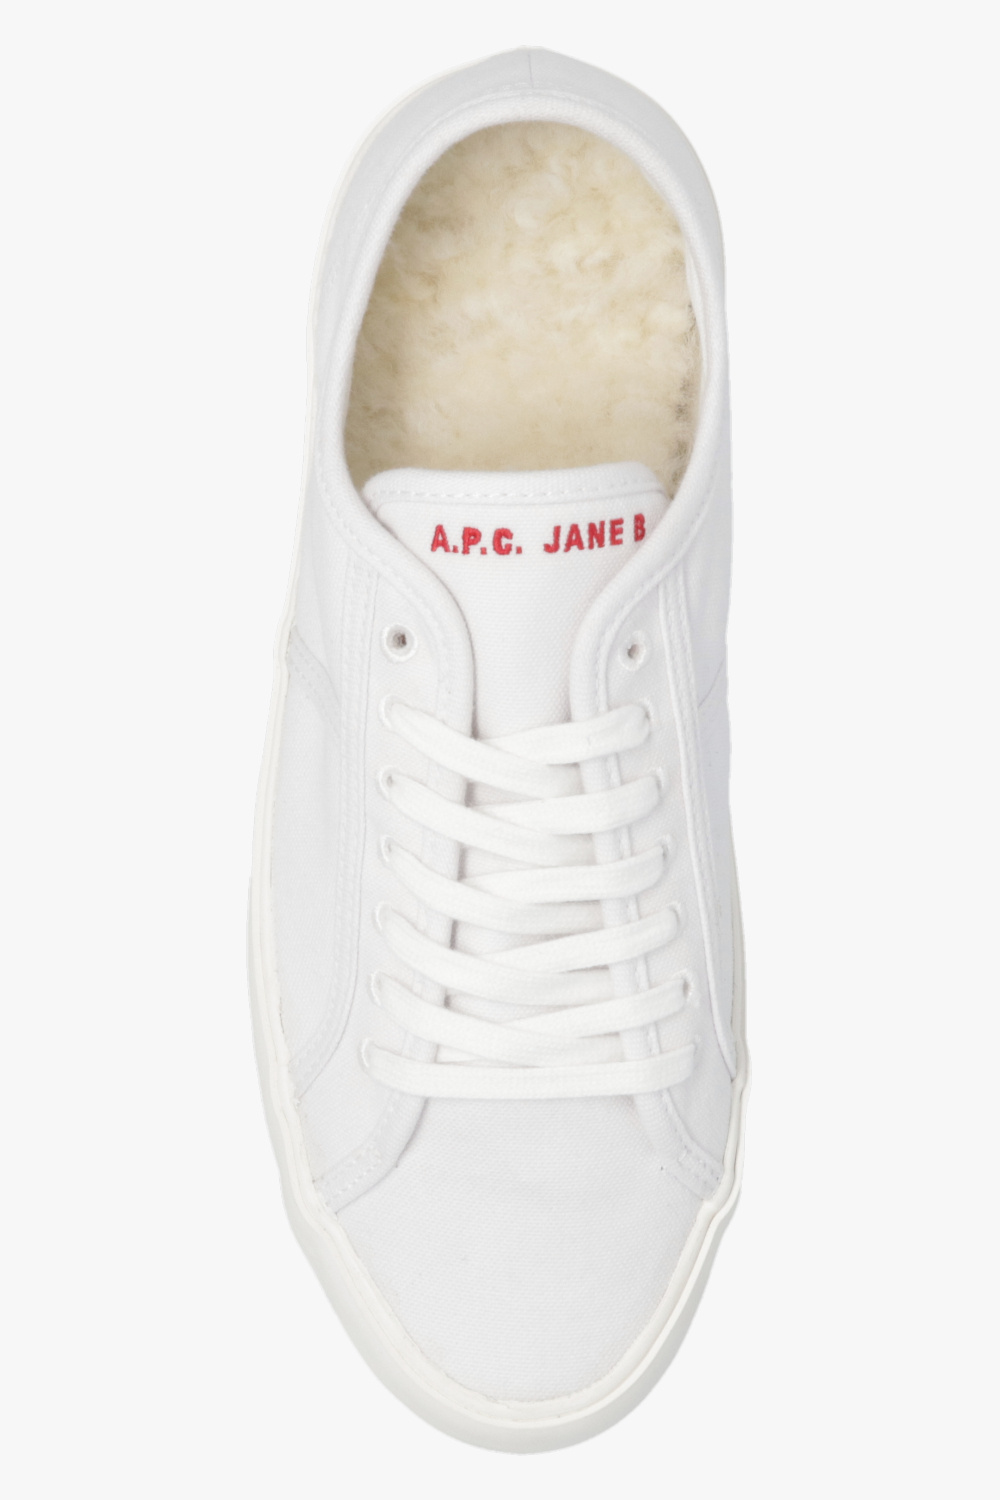 What I bought this week: A.P.C. x Jane Birkin